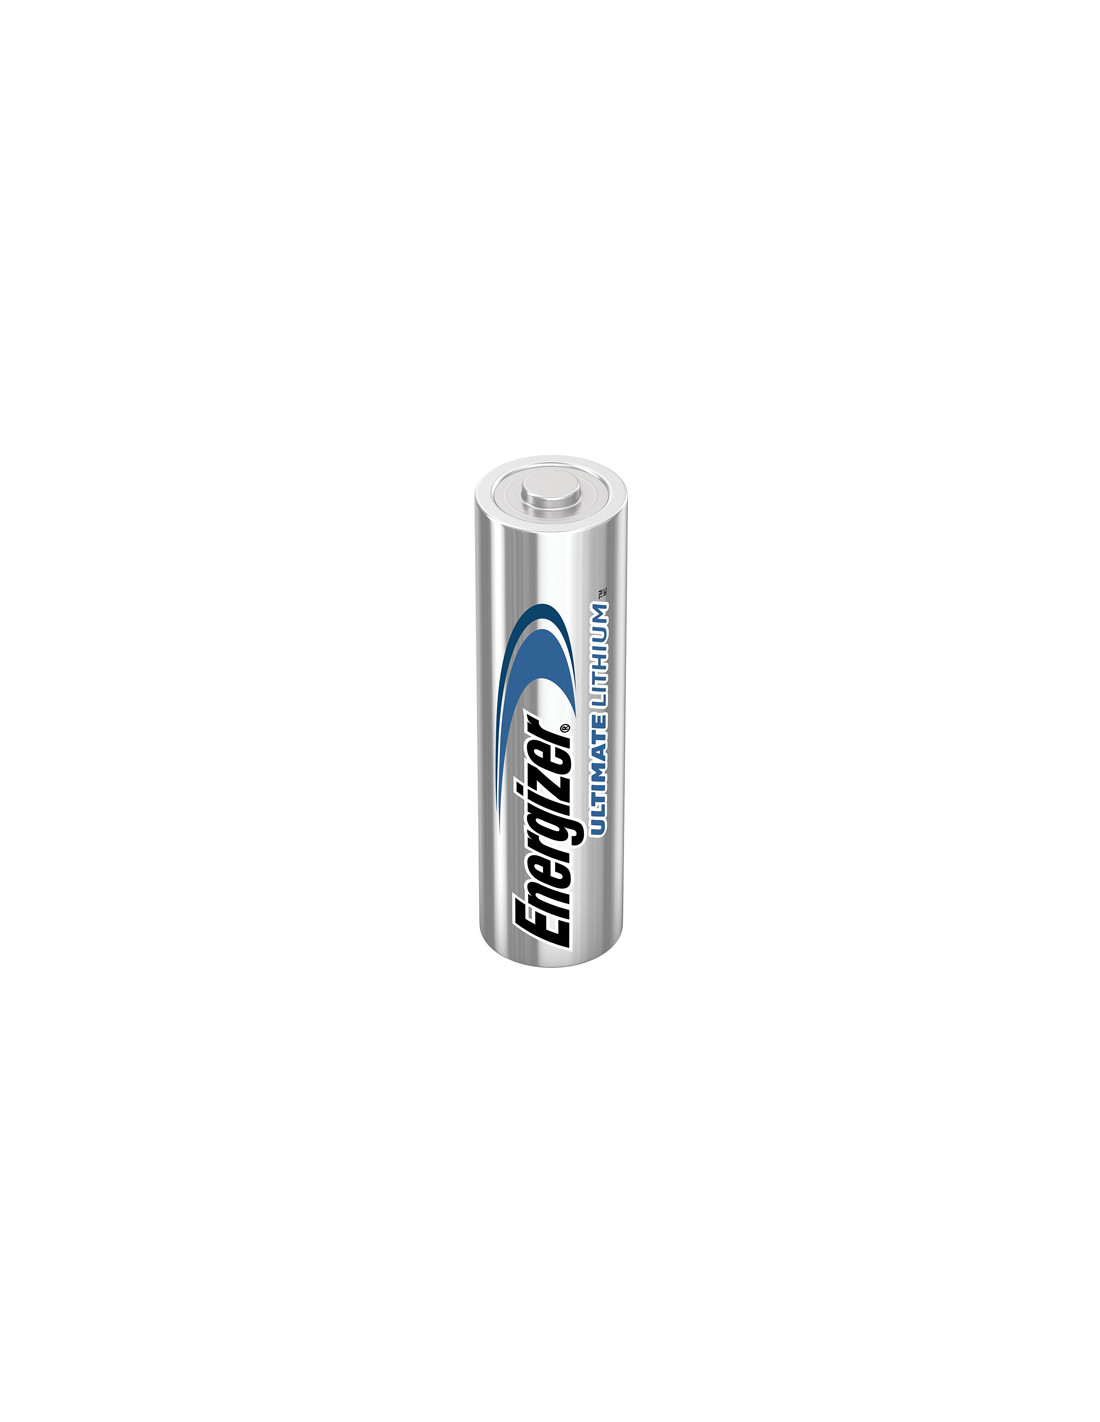 Pile Energizer® Ultimate Lithium – AA